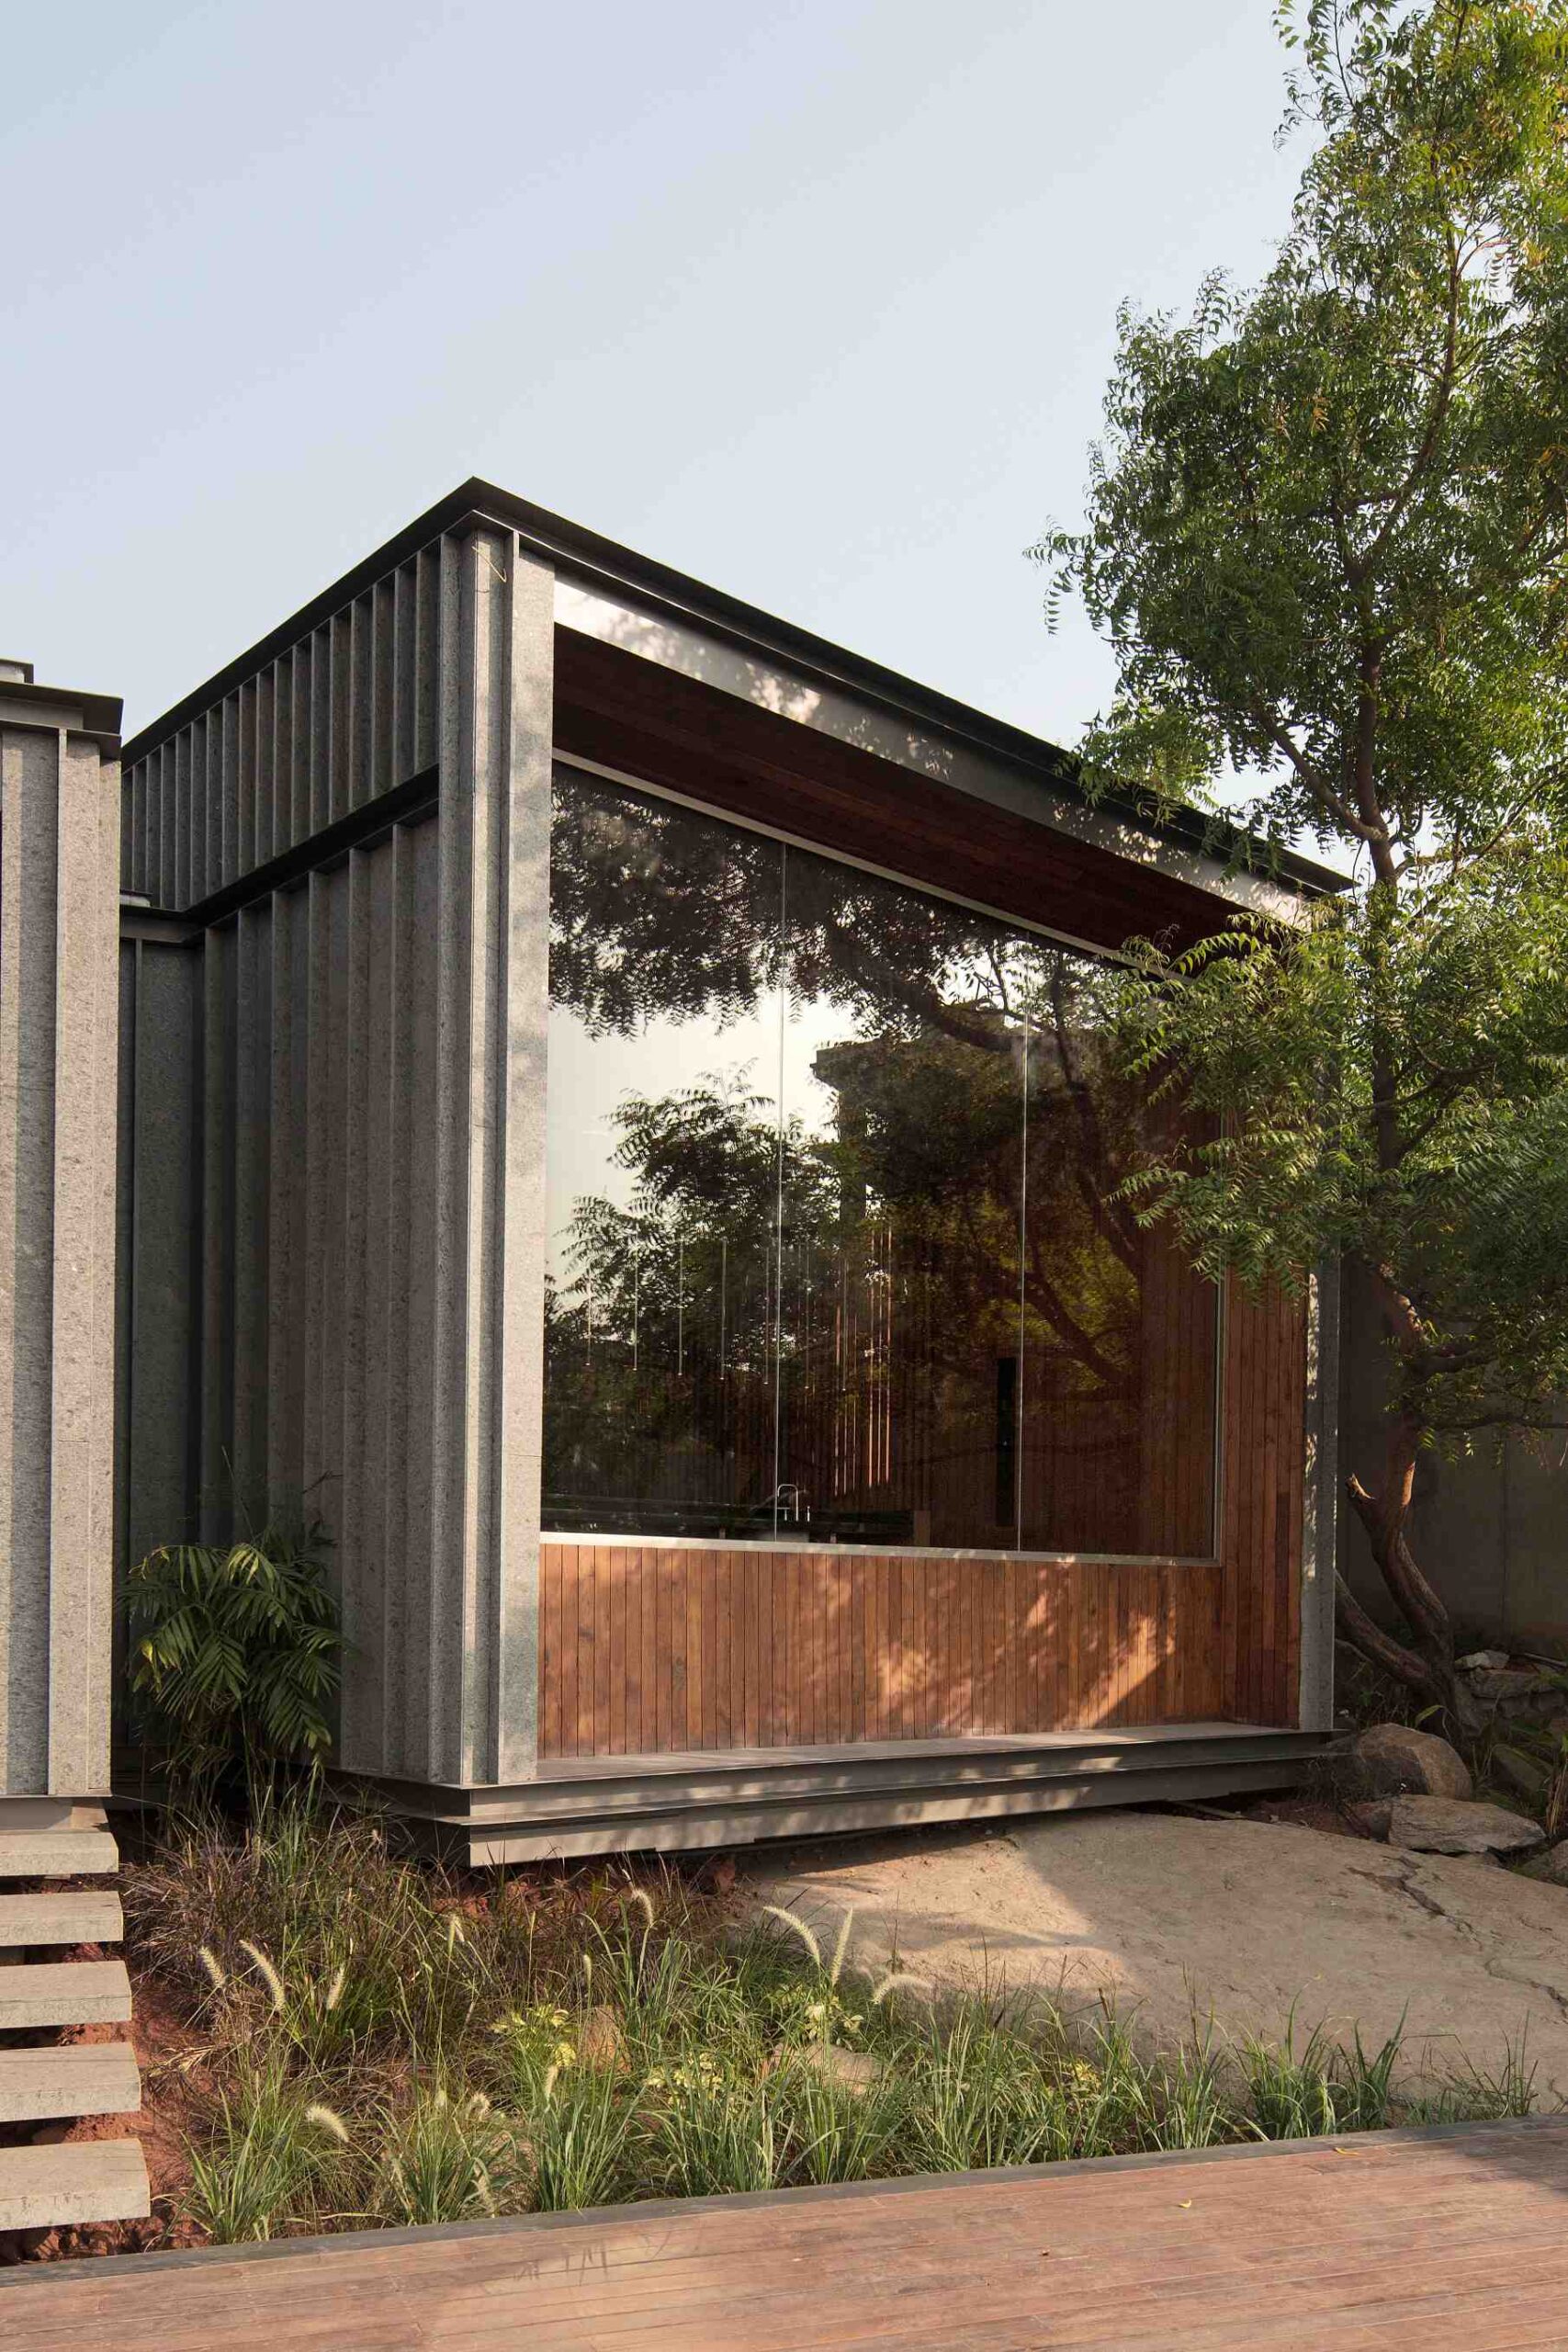 LAKE HOUSE at Hyderabad, Telangana, by Collective Project 27